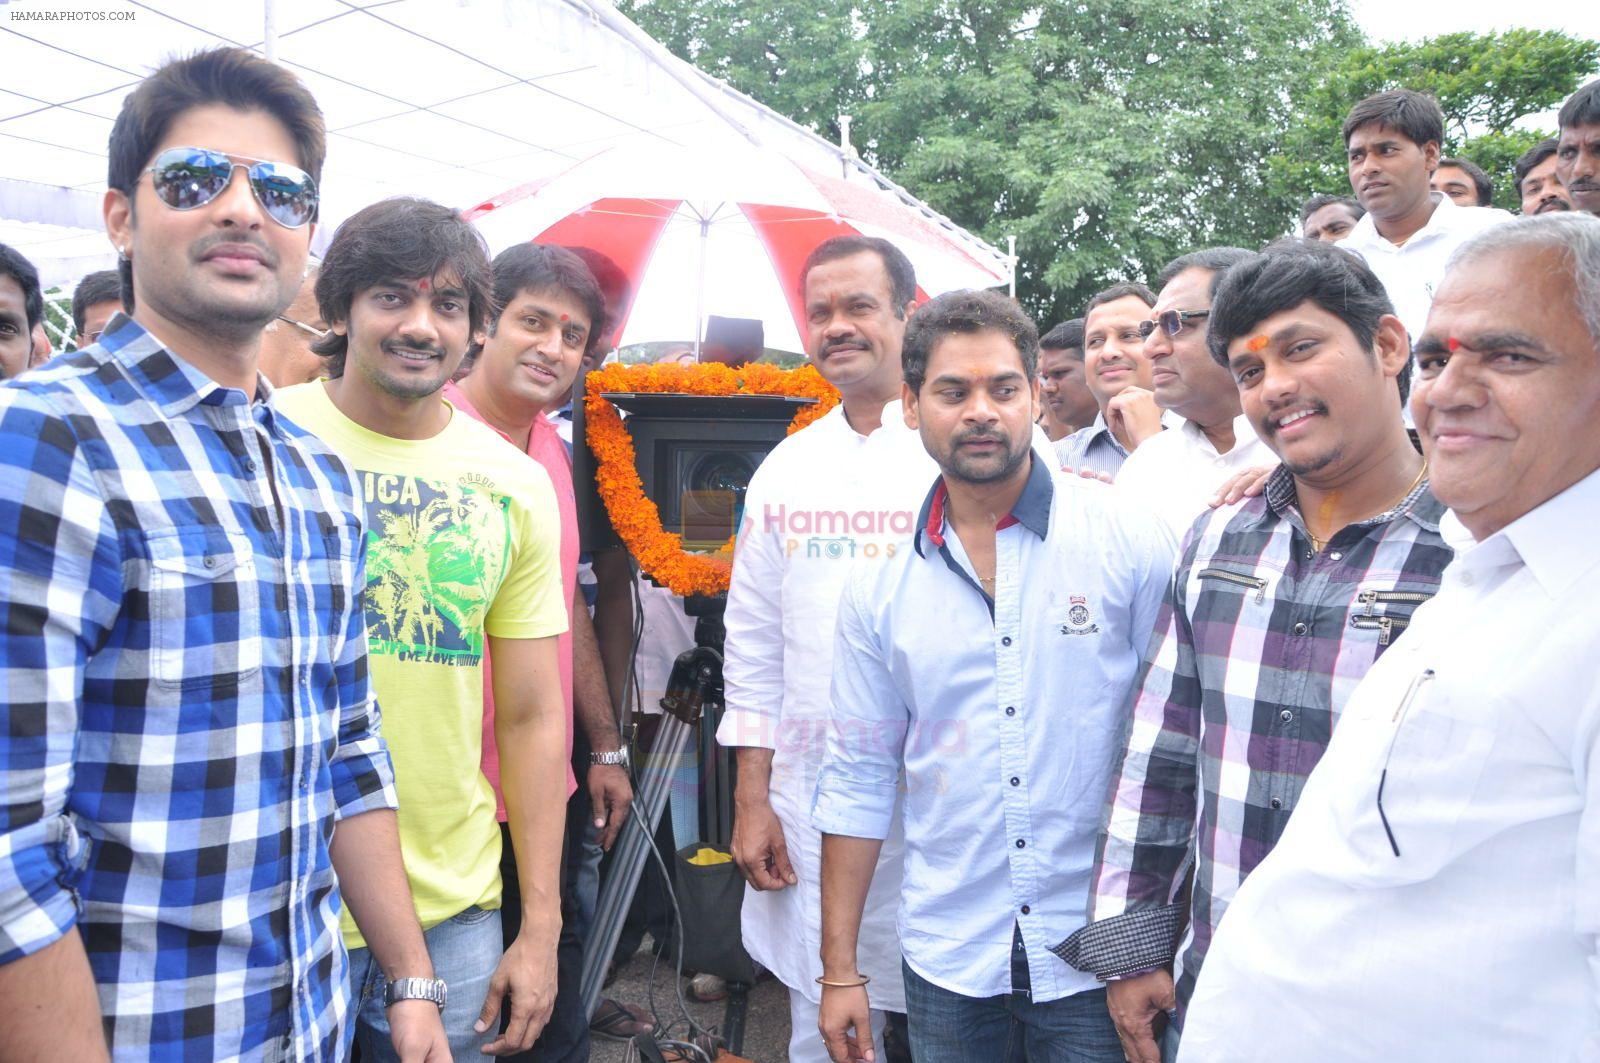 Jayanth at the opening of the movie I Hate U on 25th August 2011